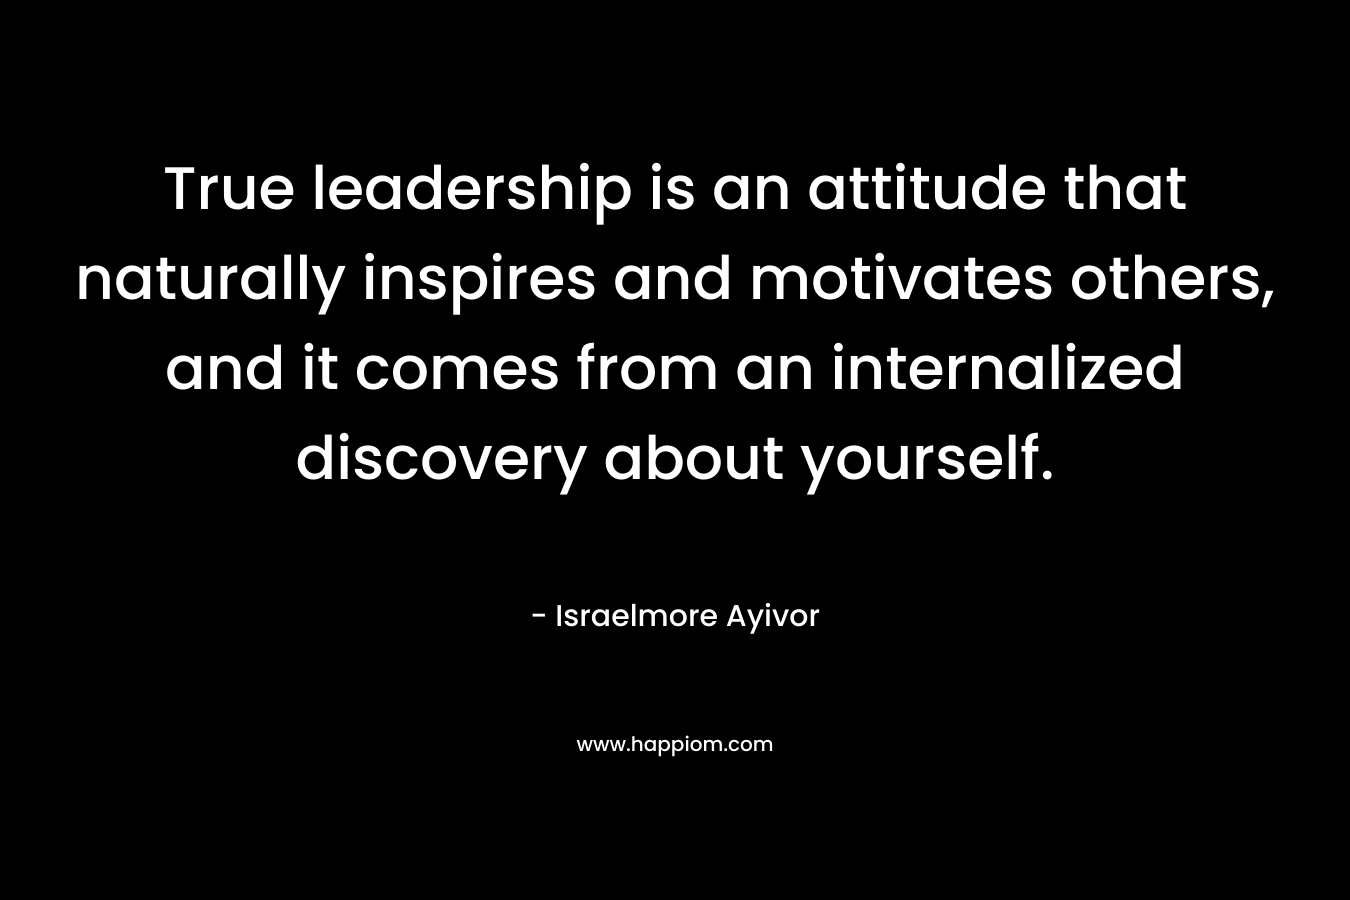 True leadership is an attitude that naturally inspires and motivates others, and it comes from an internalized discovery about yourself. – Israelmore Ayivor